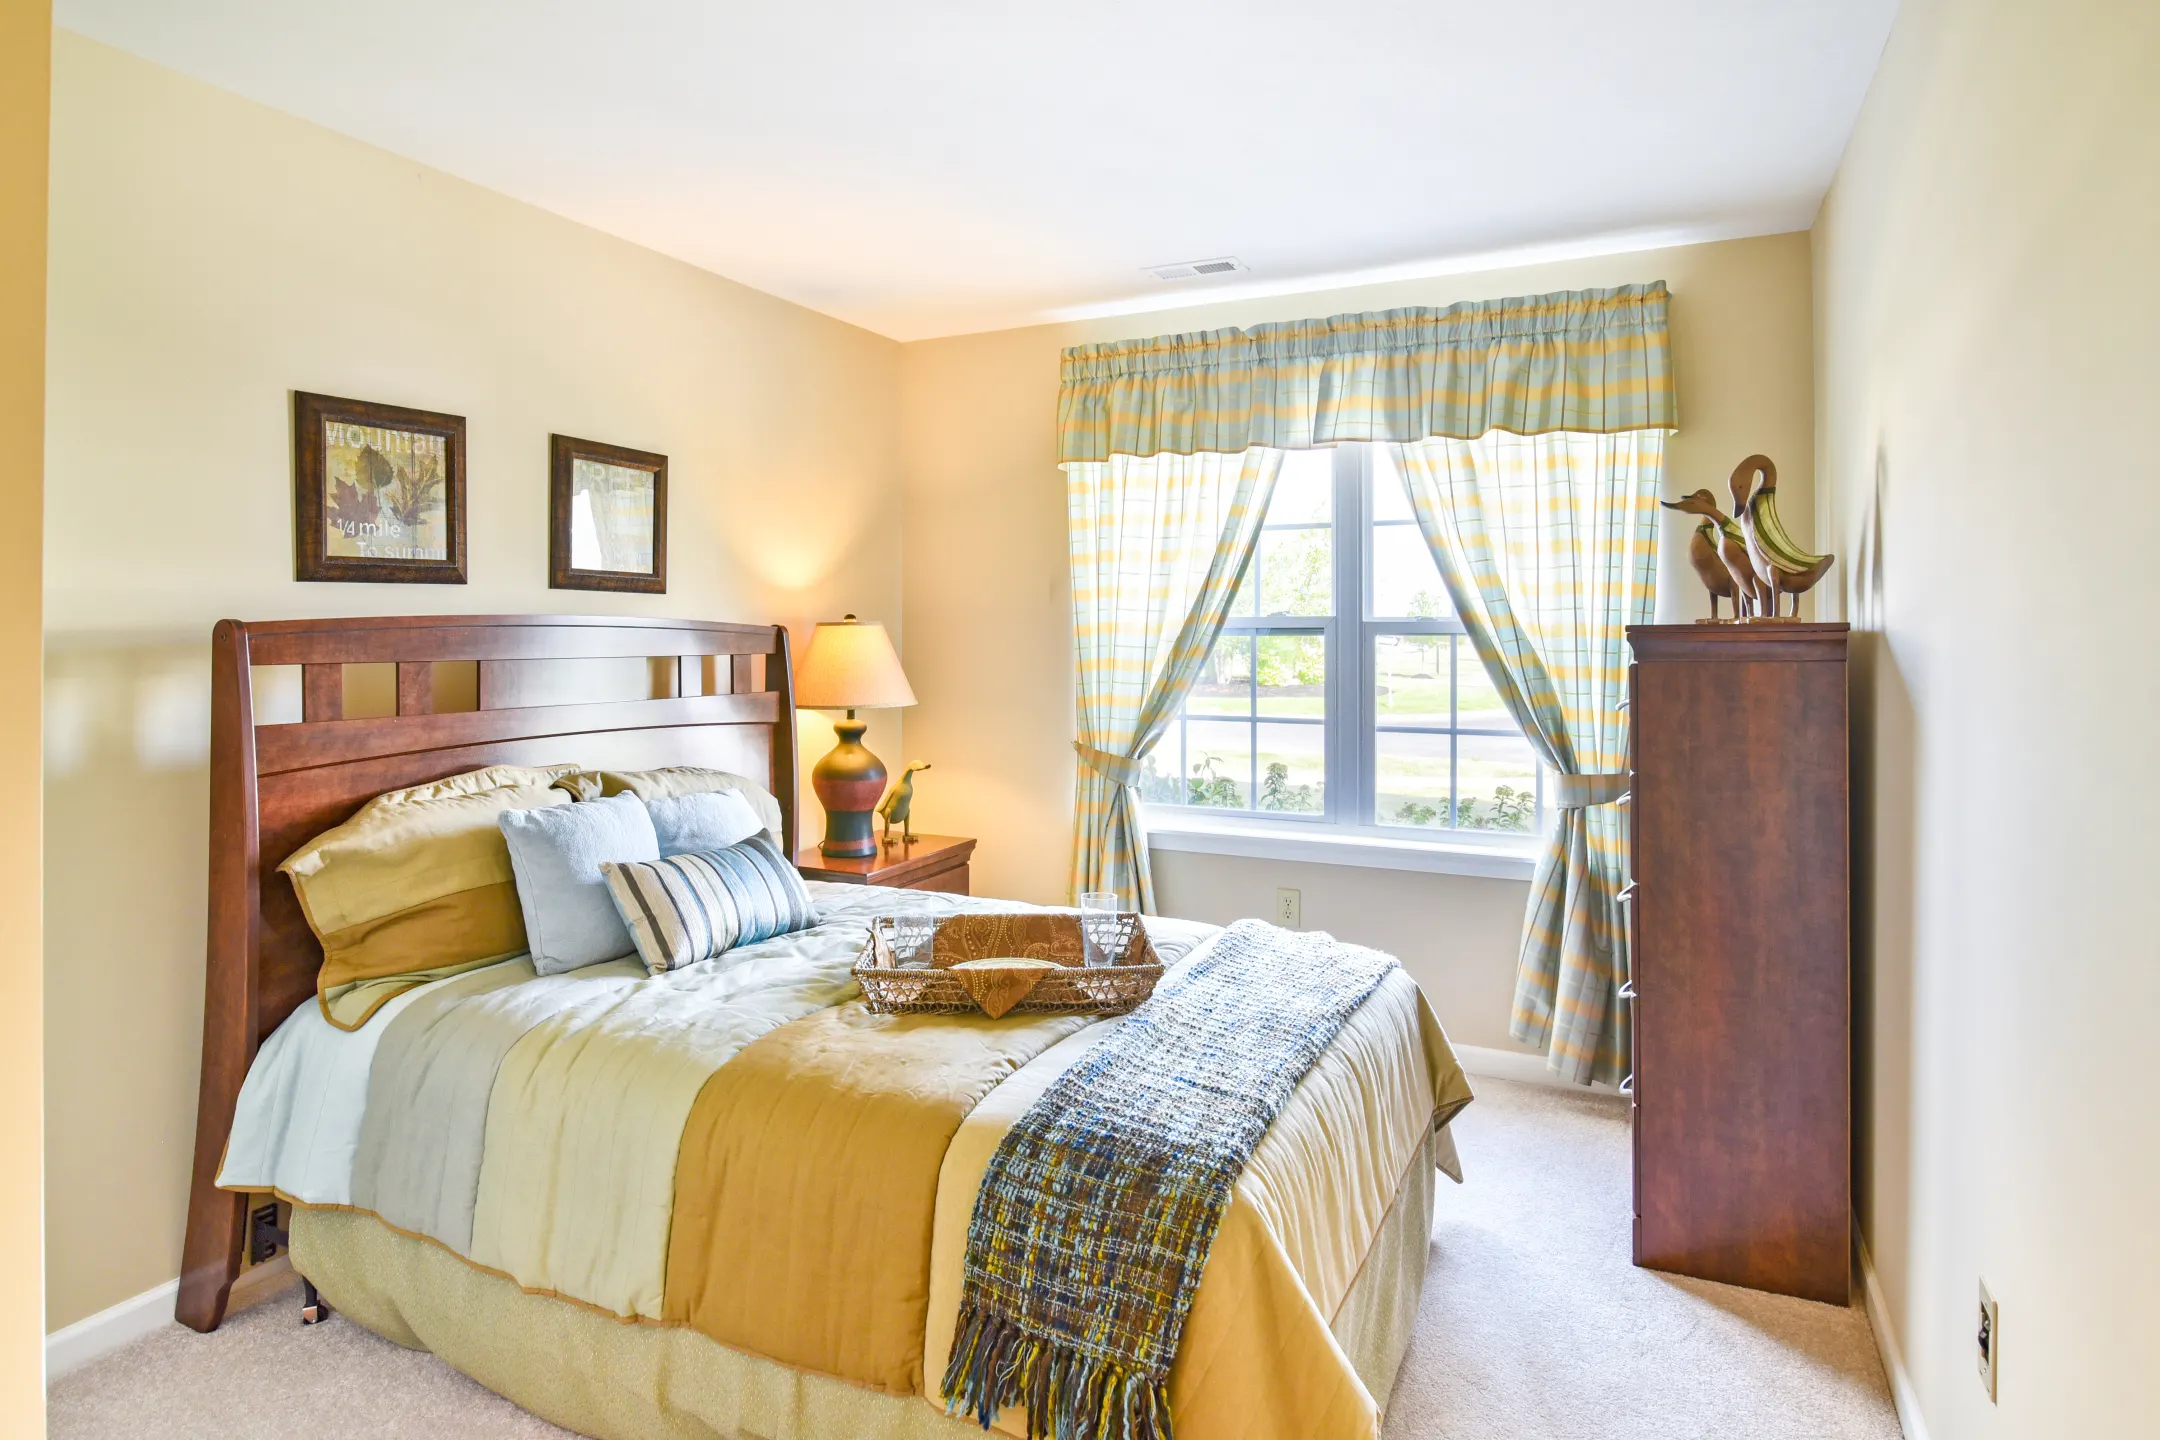 Bedroom - The Fairways at Timber Banks - Baldwinsville, NY